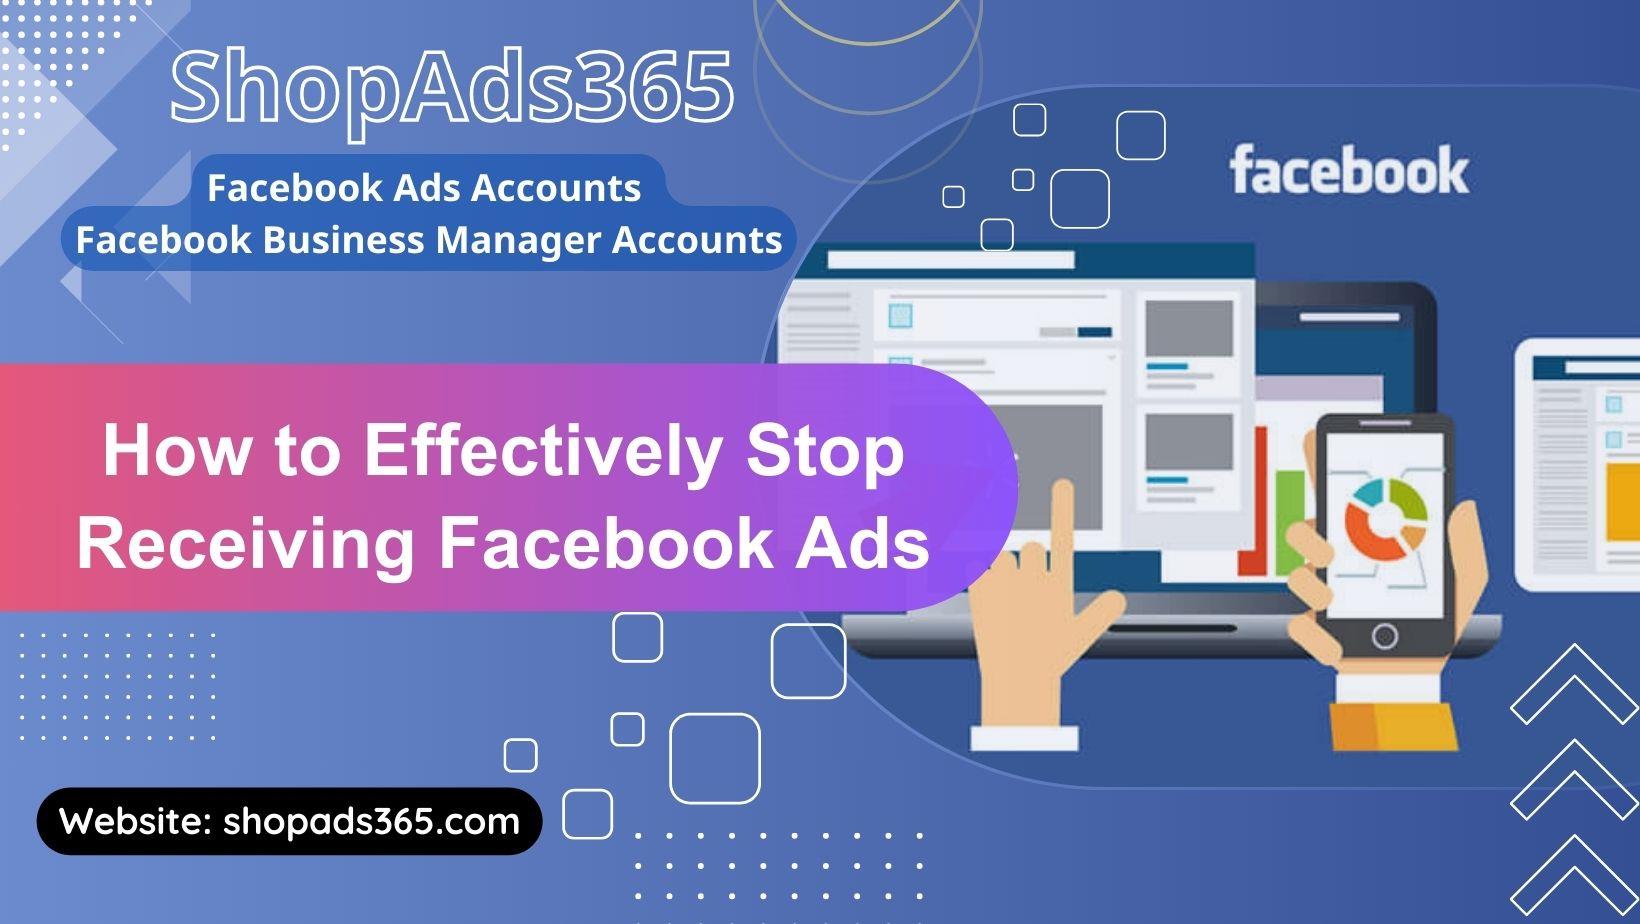 How to Effectively Stop Receiving Facebook Ads